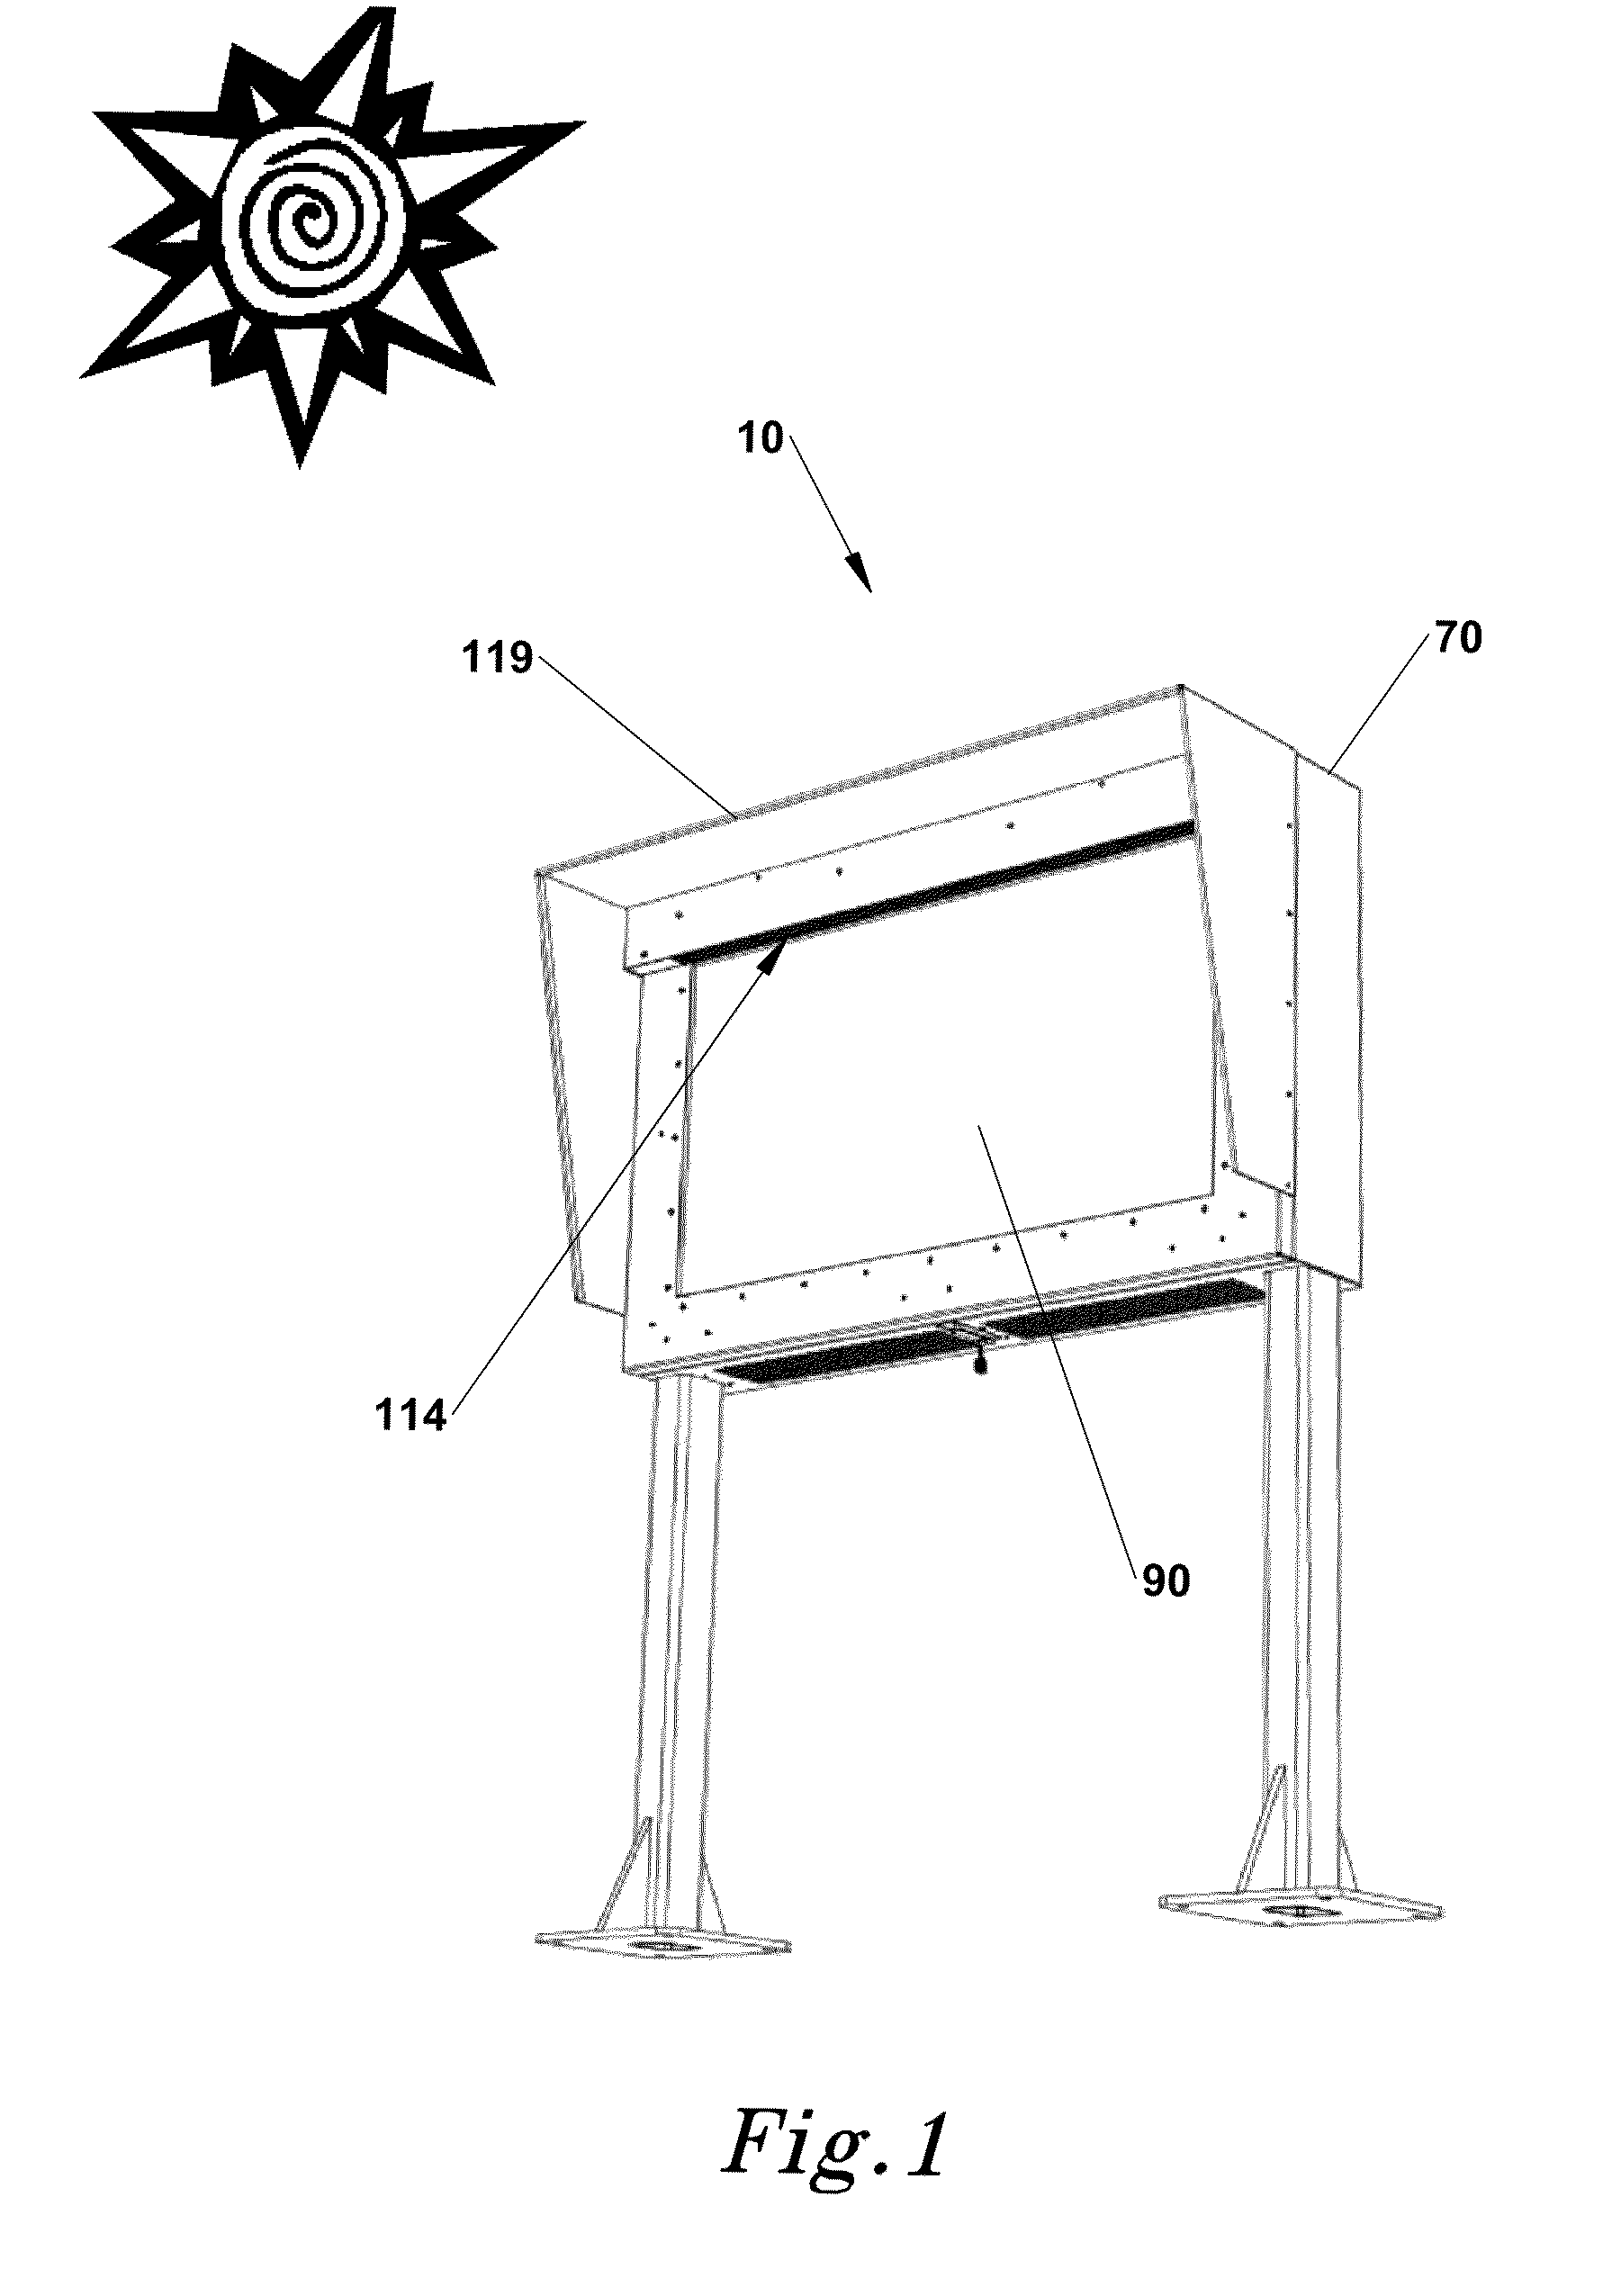 Isolated Cooling System Having an Insulator Gap and Front Polarizer